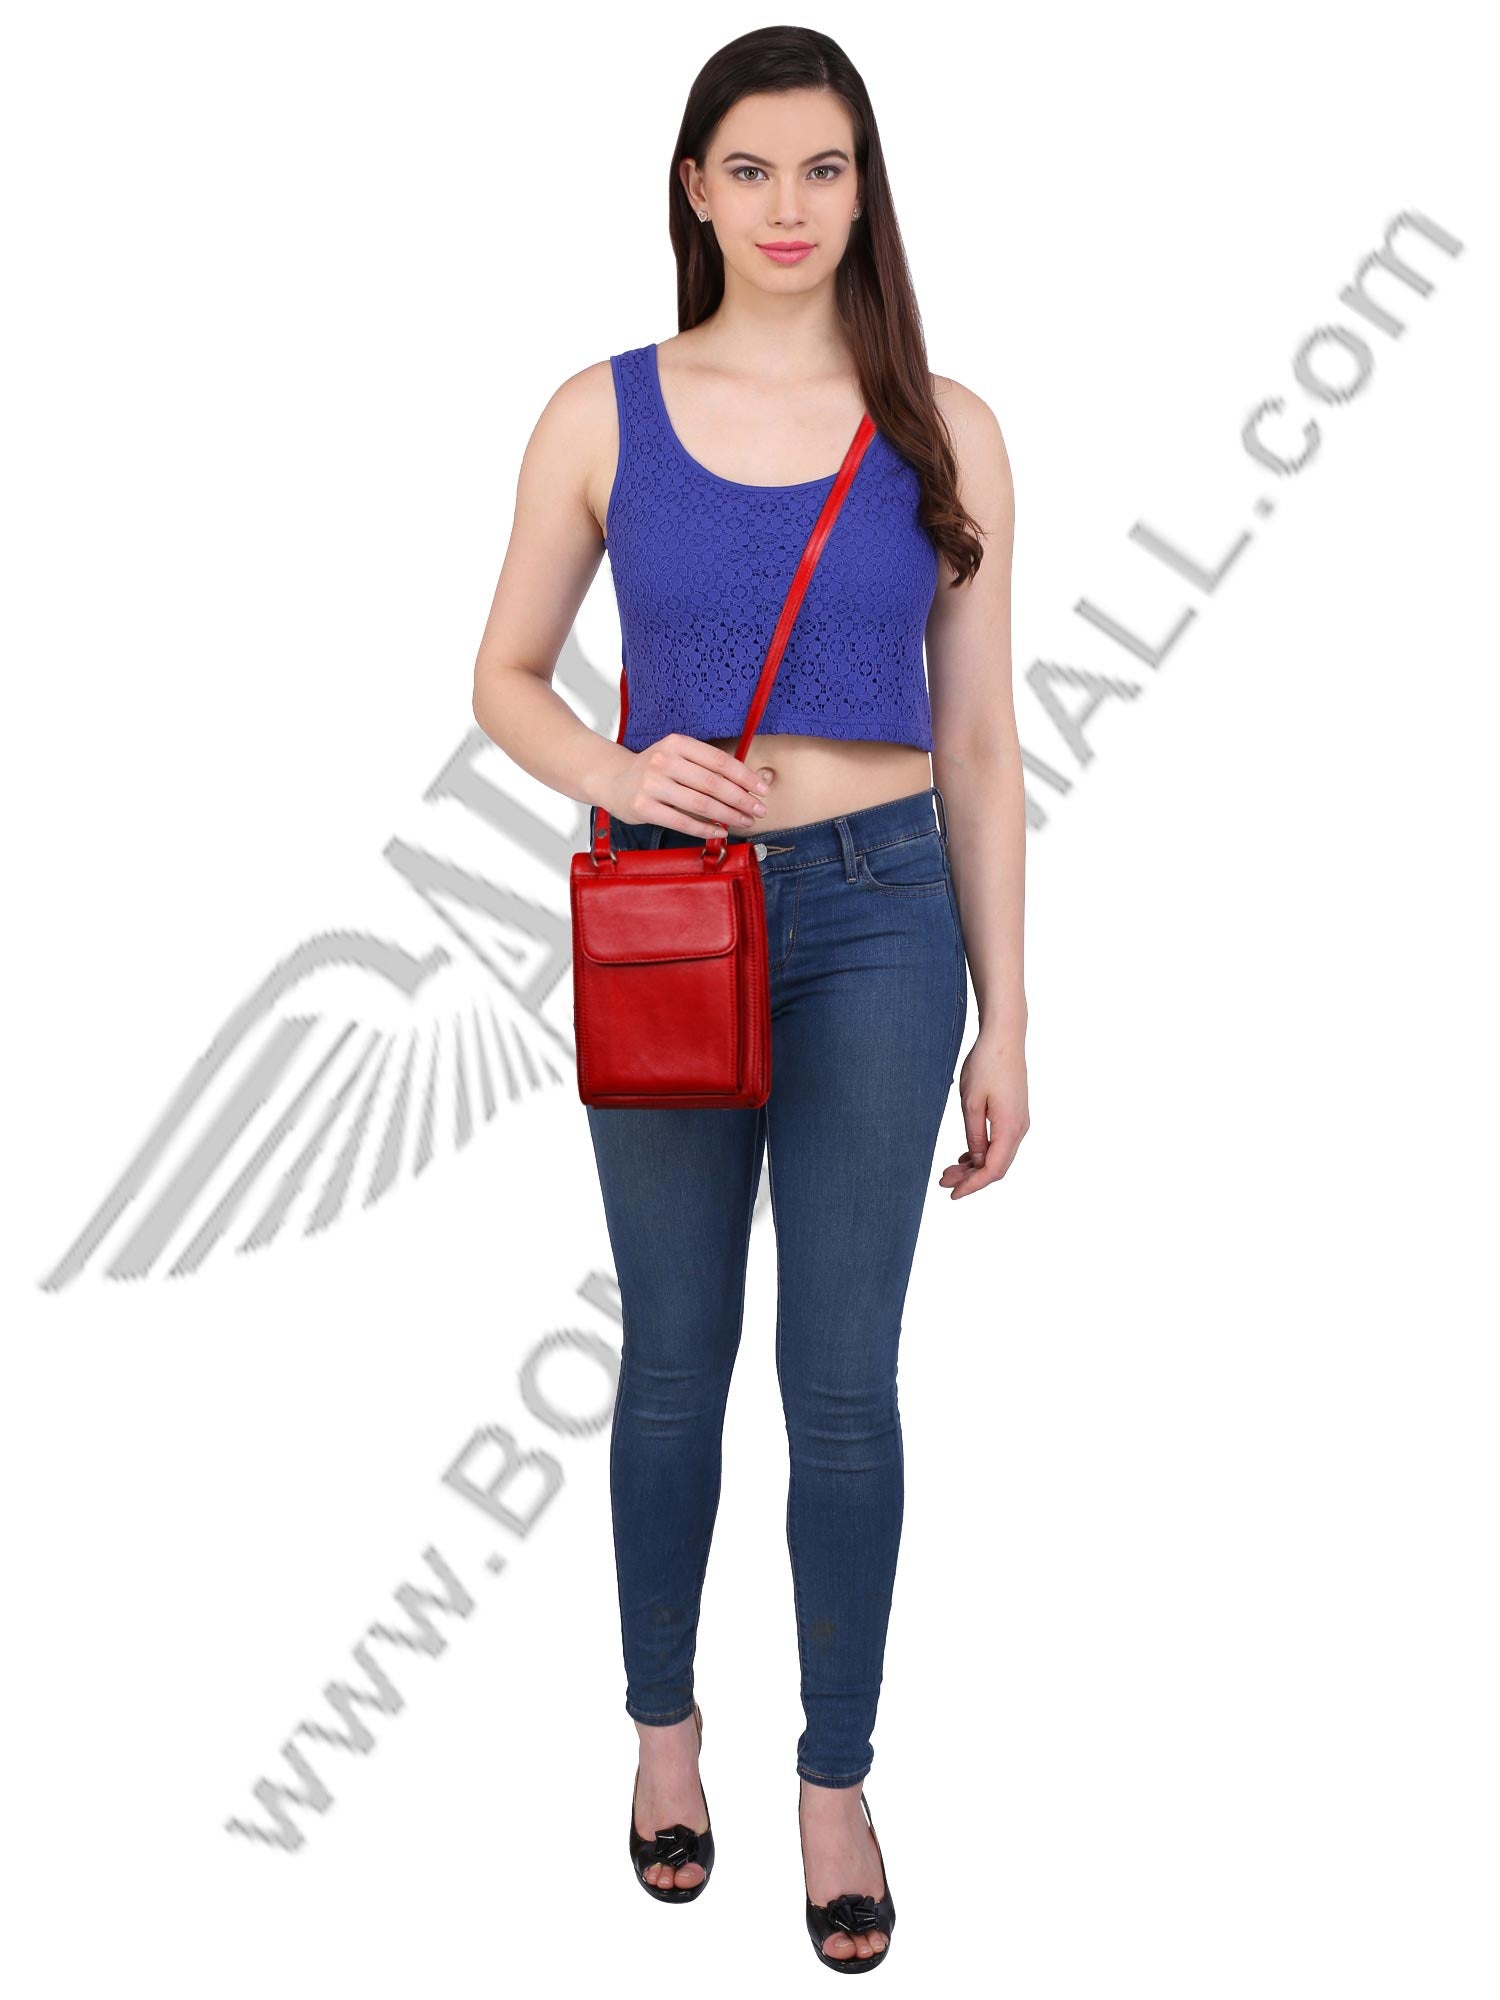 Model posing with red sling bag across the shoulder